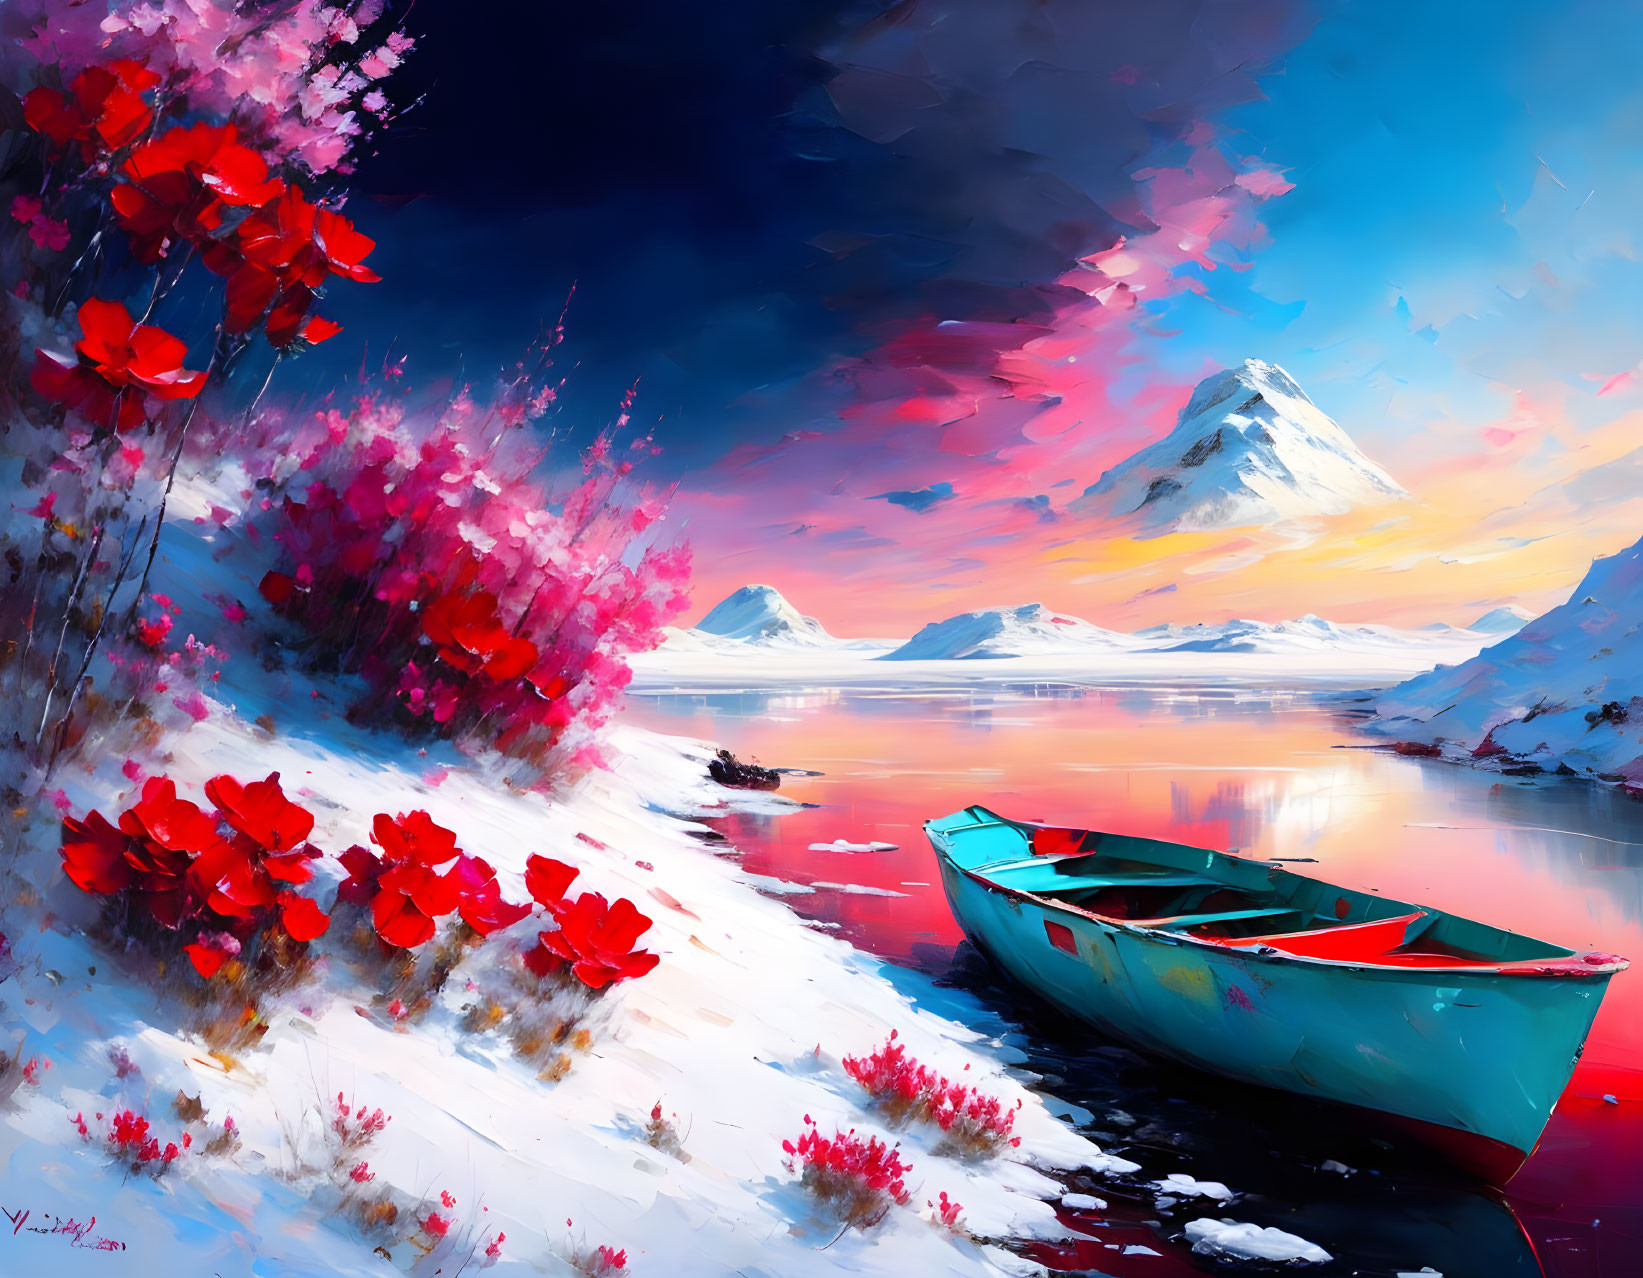 Colorful painting of blue boat on snowy shore with pink trees, red trees, and snow-capped